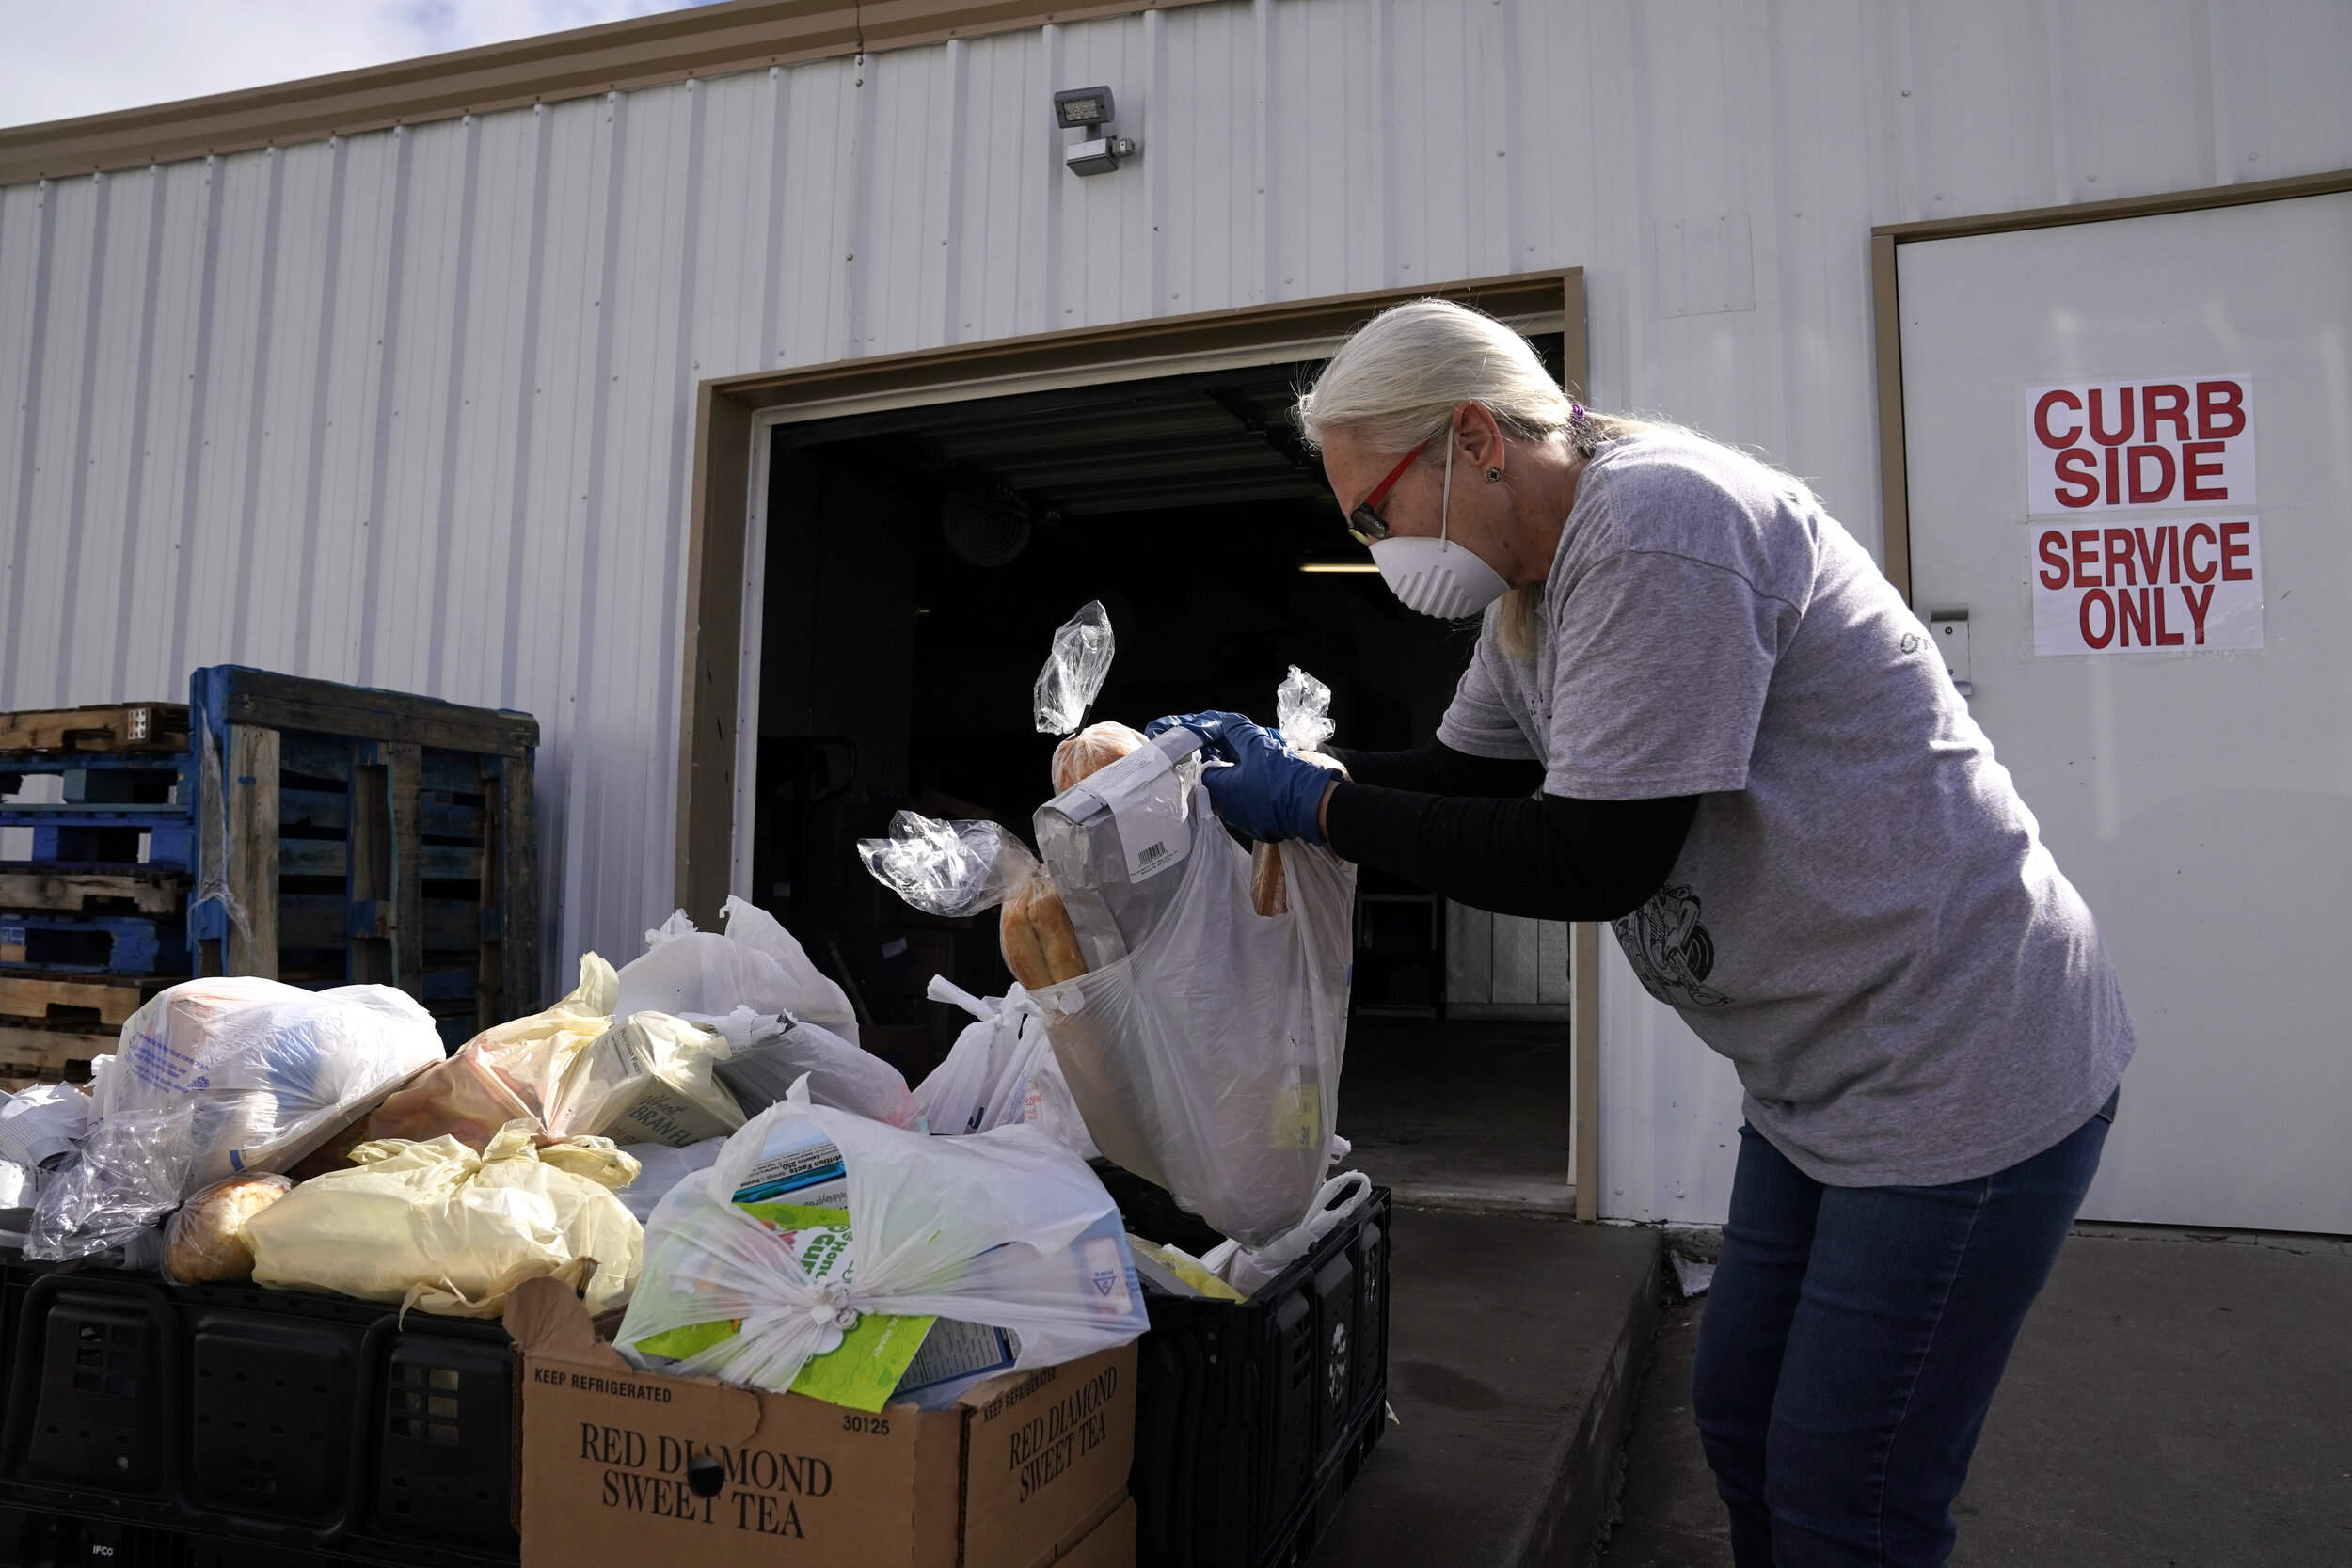  Kathy Reed prepares food for pickup at Bristow Social Services in Bristow, Oklahoma, March 24, 2020. Nick Oxford for The Washington Post 